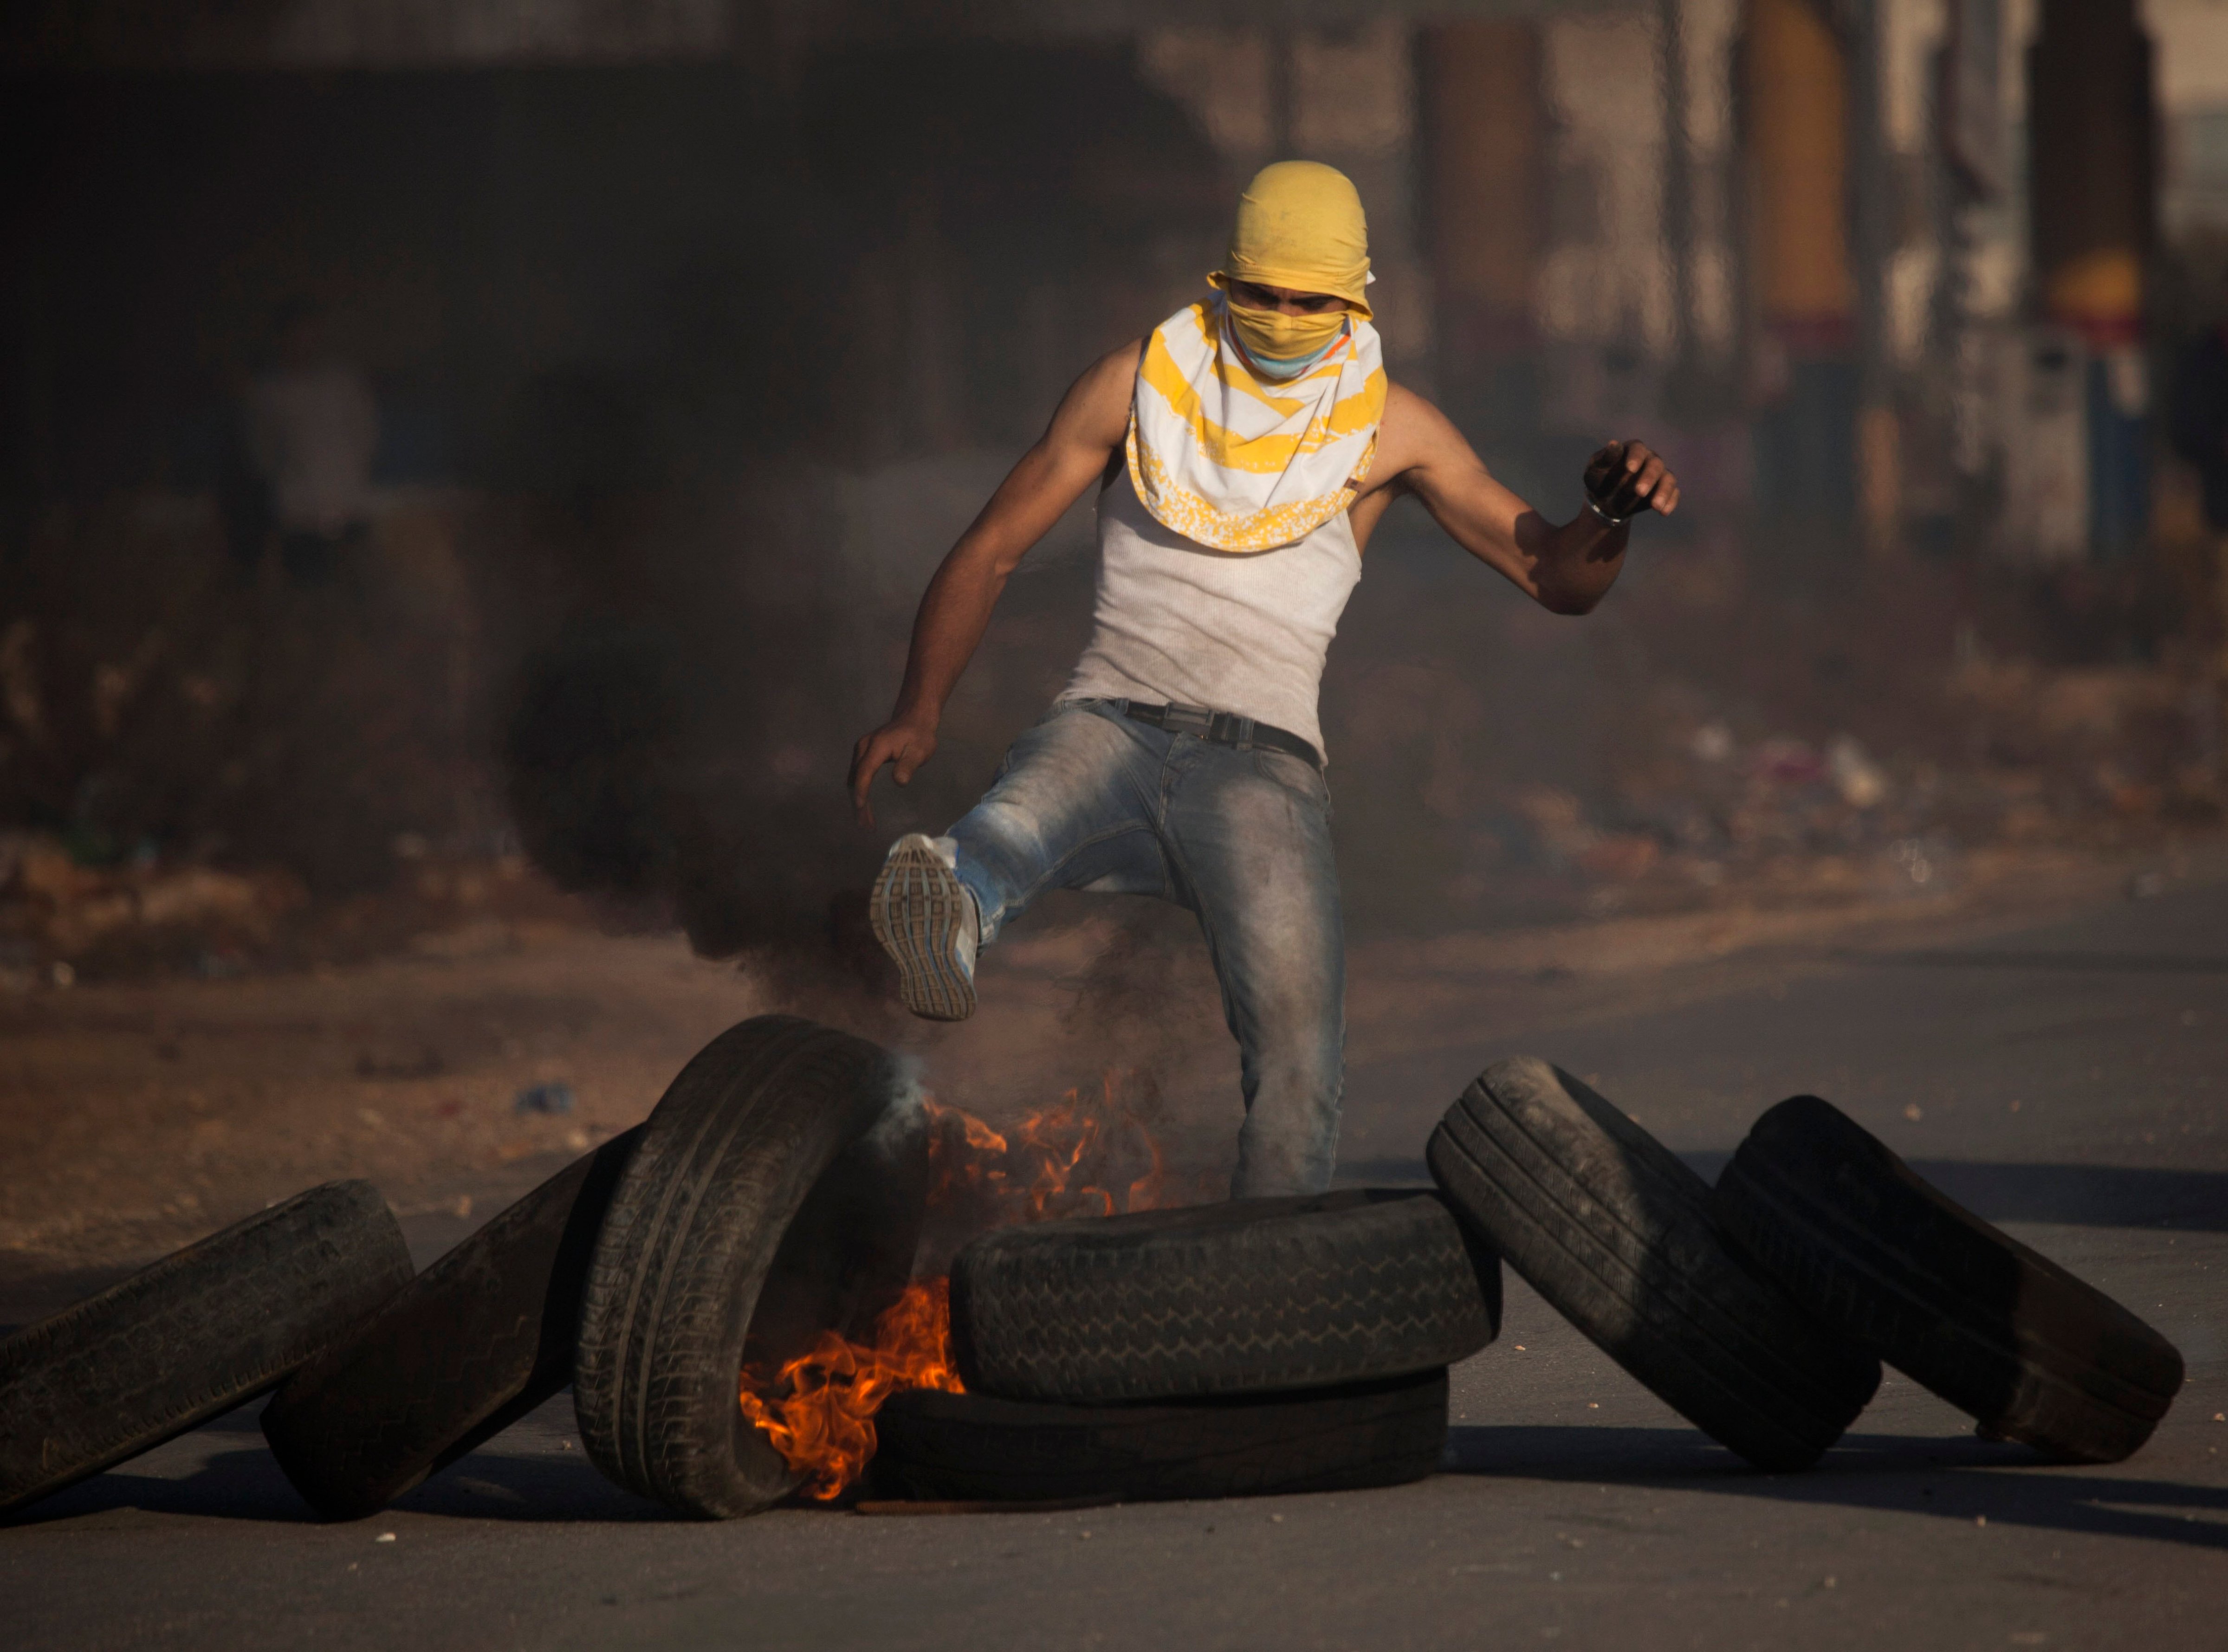 A masked Palestinian kicks a burning tire during clashes with Israeli security forces a day after 14-year-old Palestinian-American, Orwah Hammad was killed by Israeli troops during clashes, in the village of Silwad, near the West Bank city of Ramallah on Oct. 25, 2014. (Majdi Mohammed—AP)